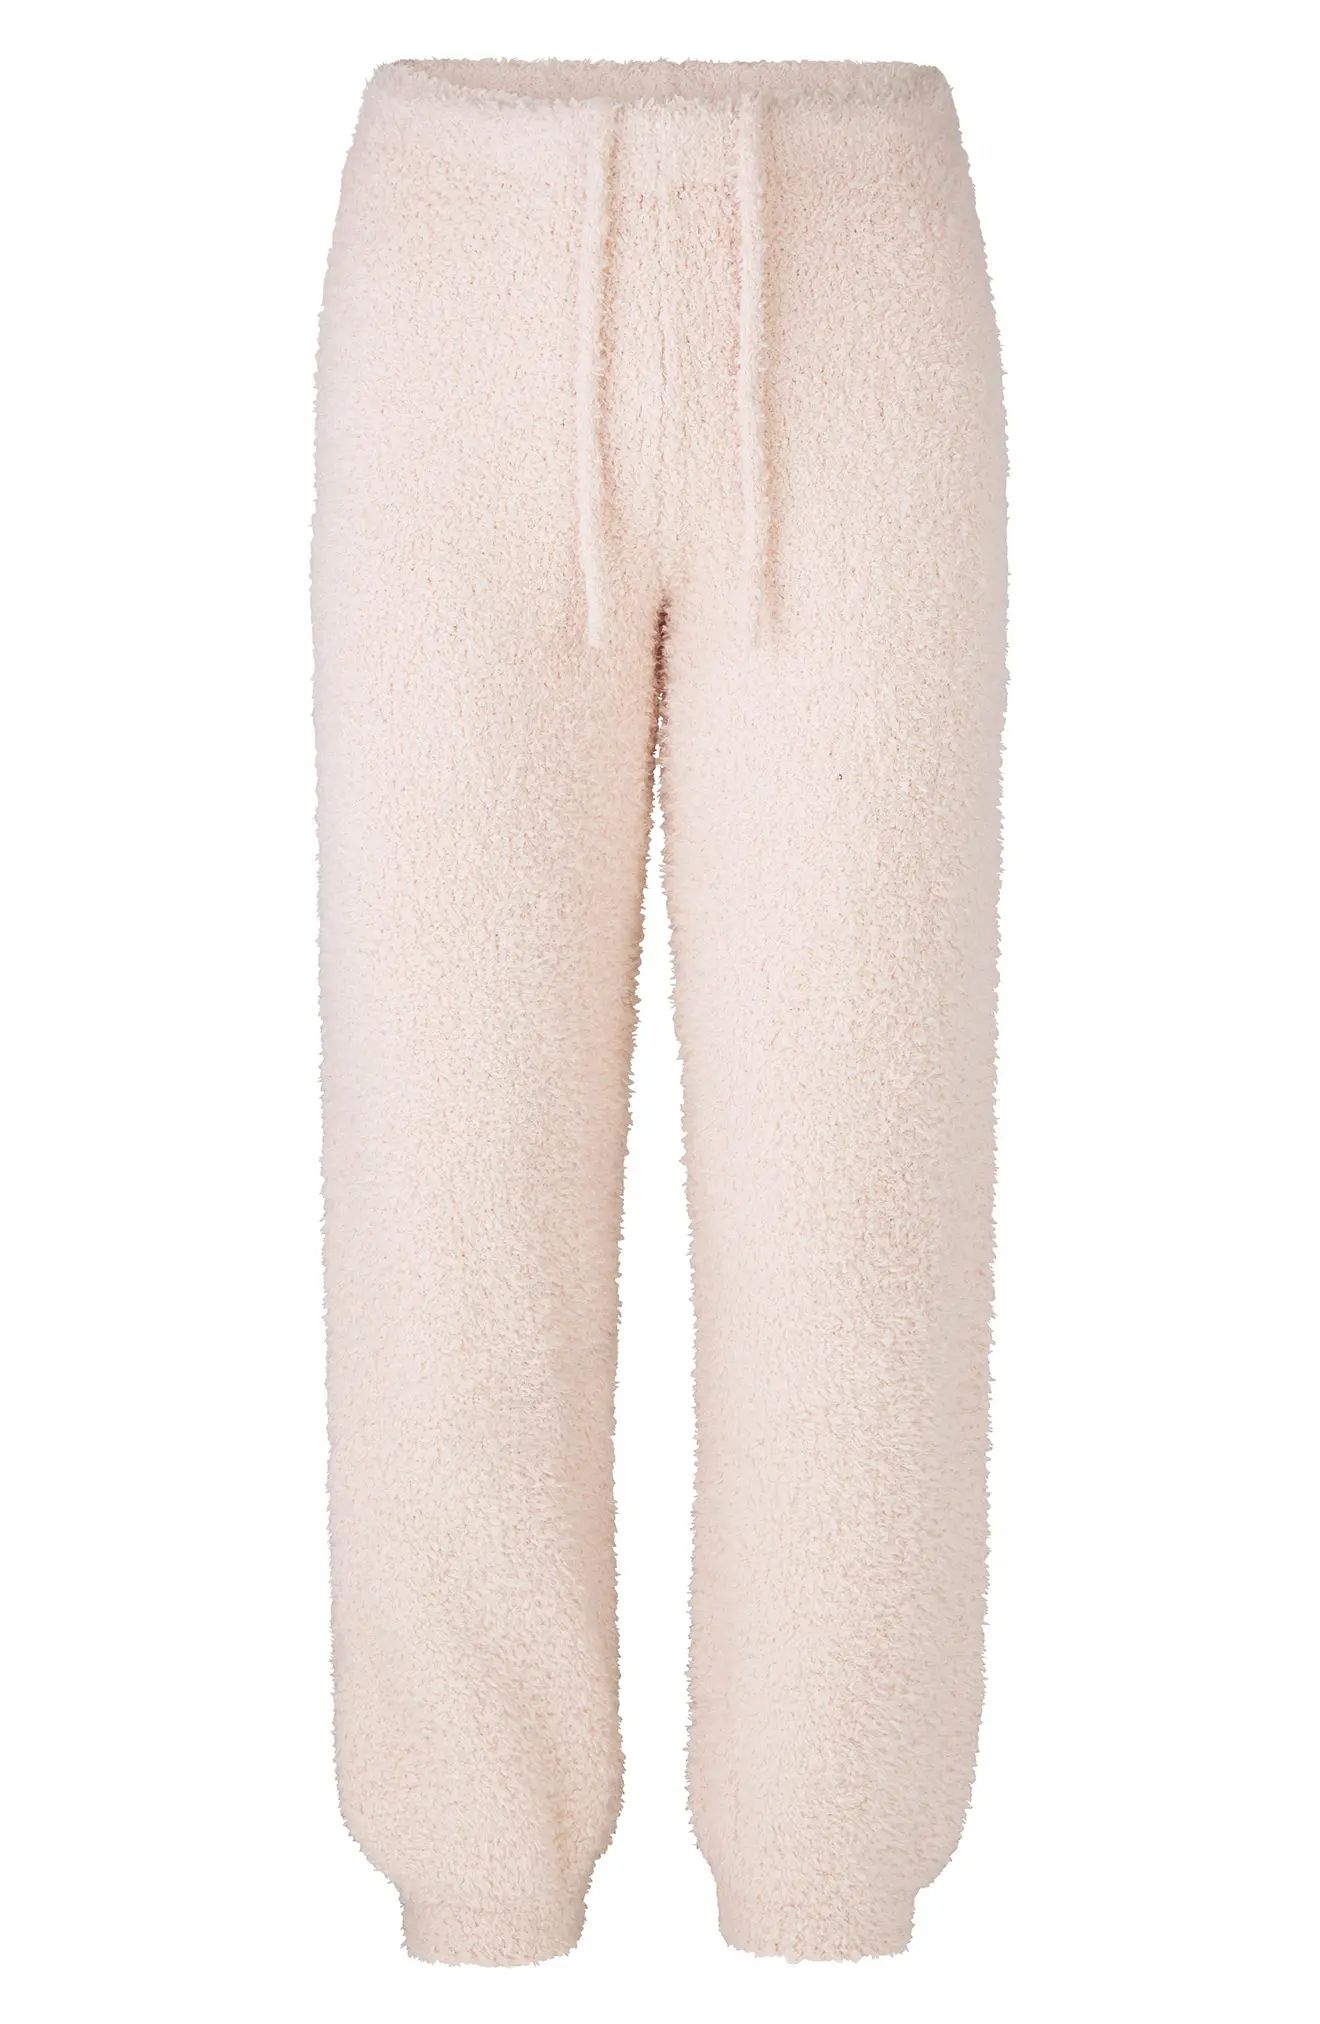 SKIMS Cozy Knit Joggers in Dusk at Nordstrom, Size 2X | Nordstrom